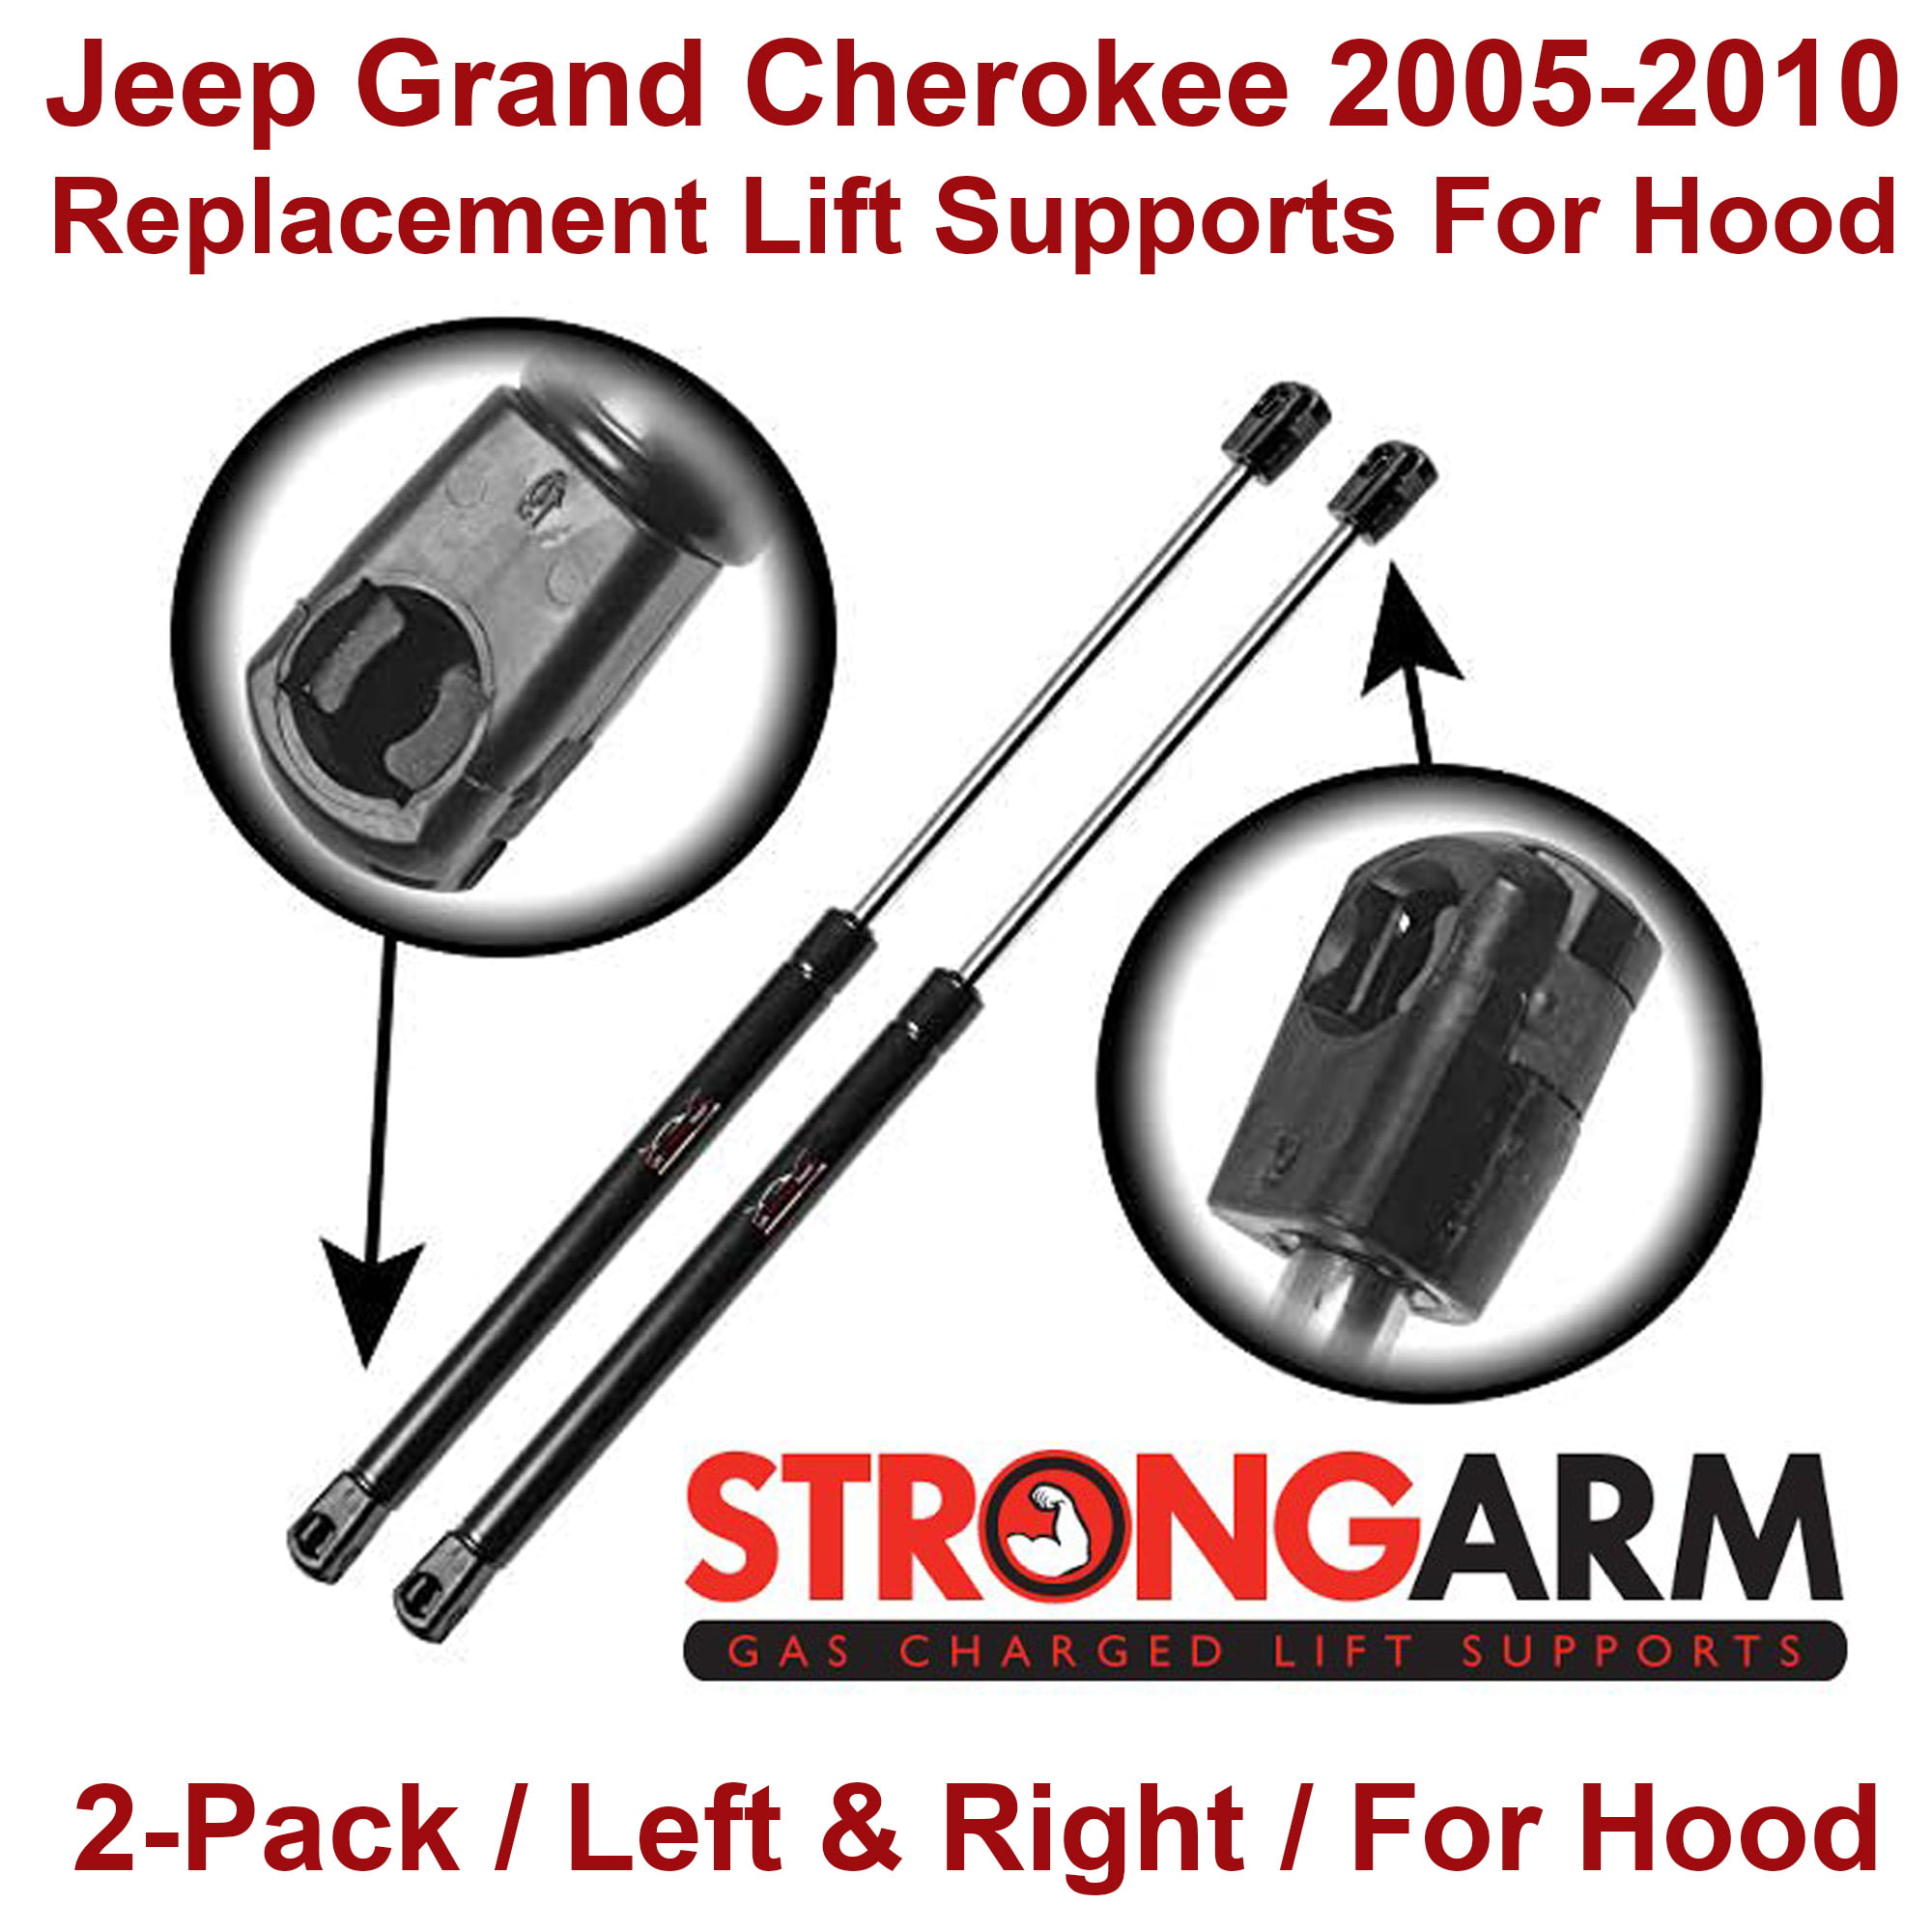 Tailgate Gas Charged Lift Support Struts For Jeep Grand Cherokee 05-08 2 Qty 